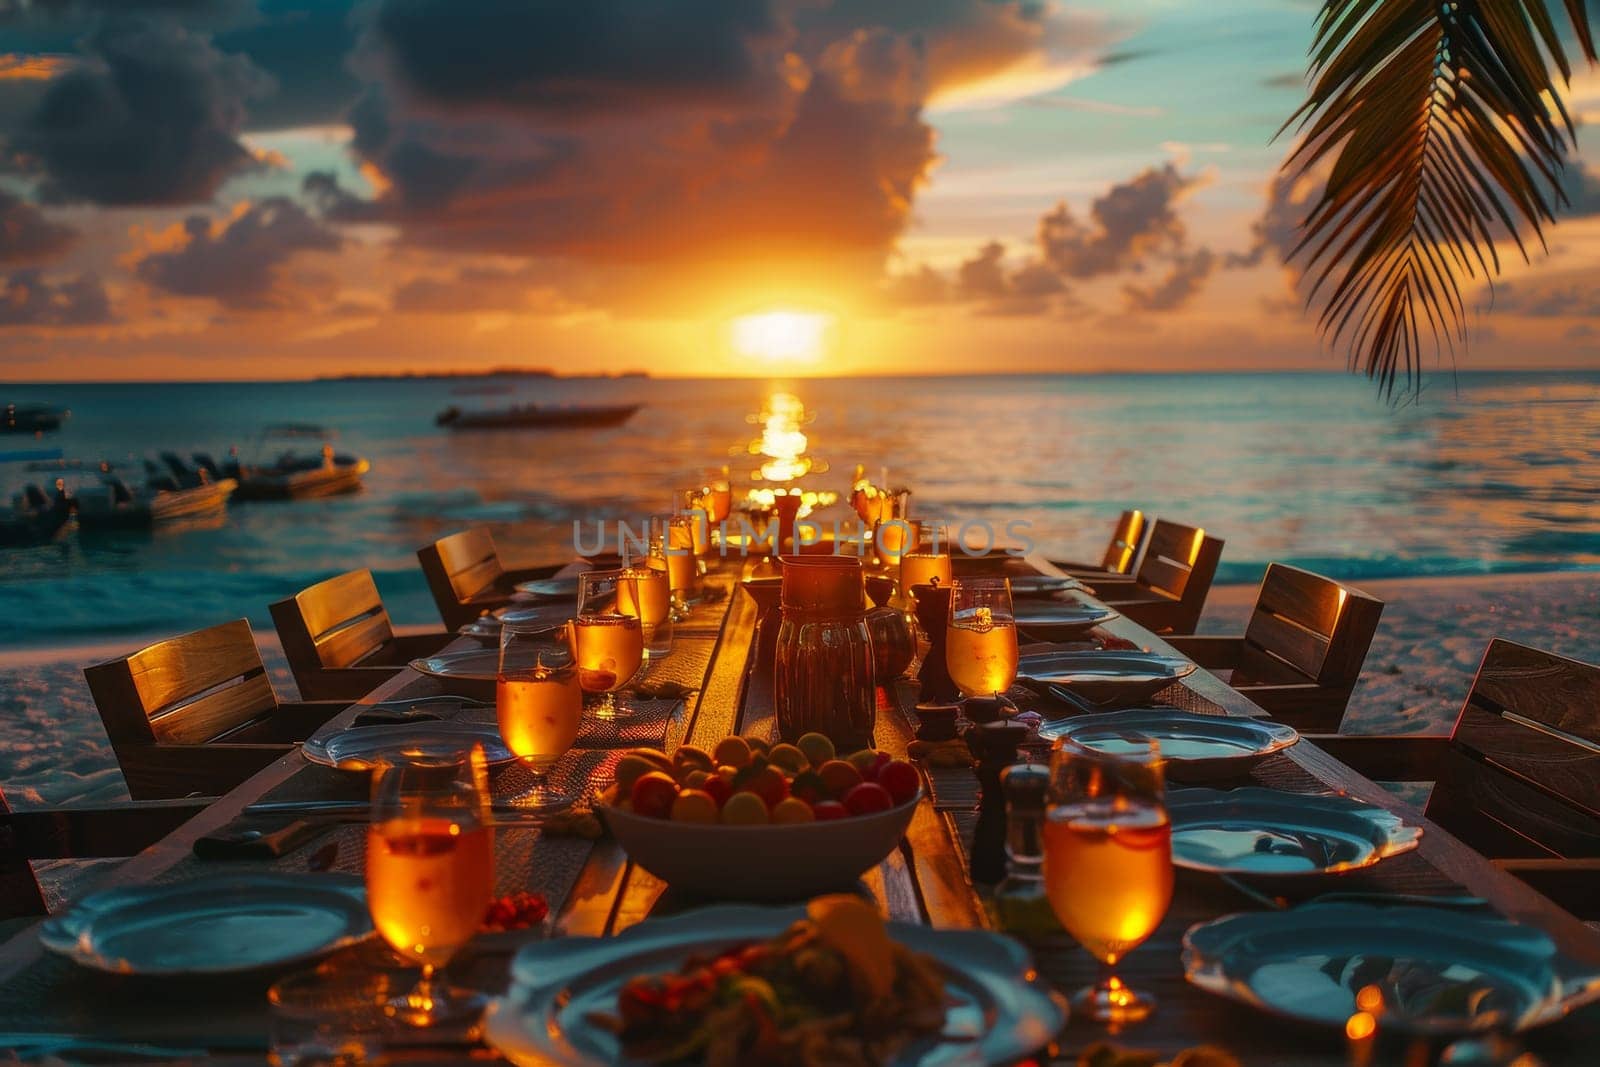 A long table with a beautiful ocean view in the background. The table is set with plates, glasses, and utensils, and there are several chairs around it. The atmosphere is relaxed and inviting